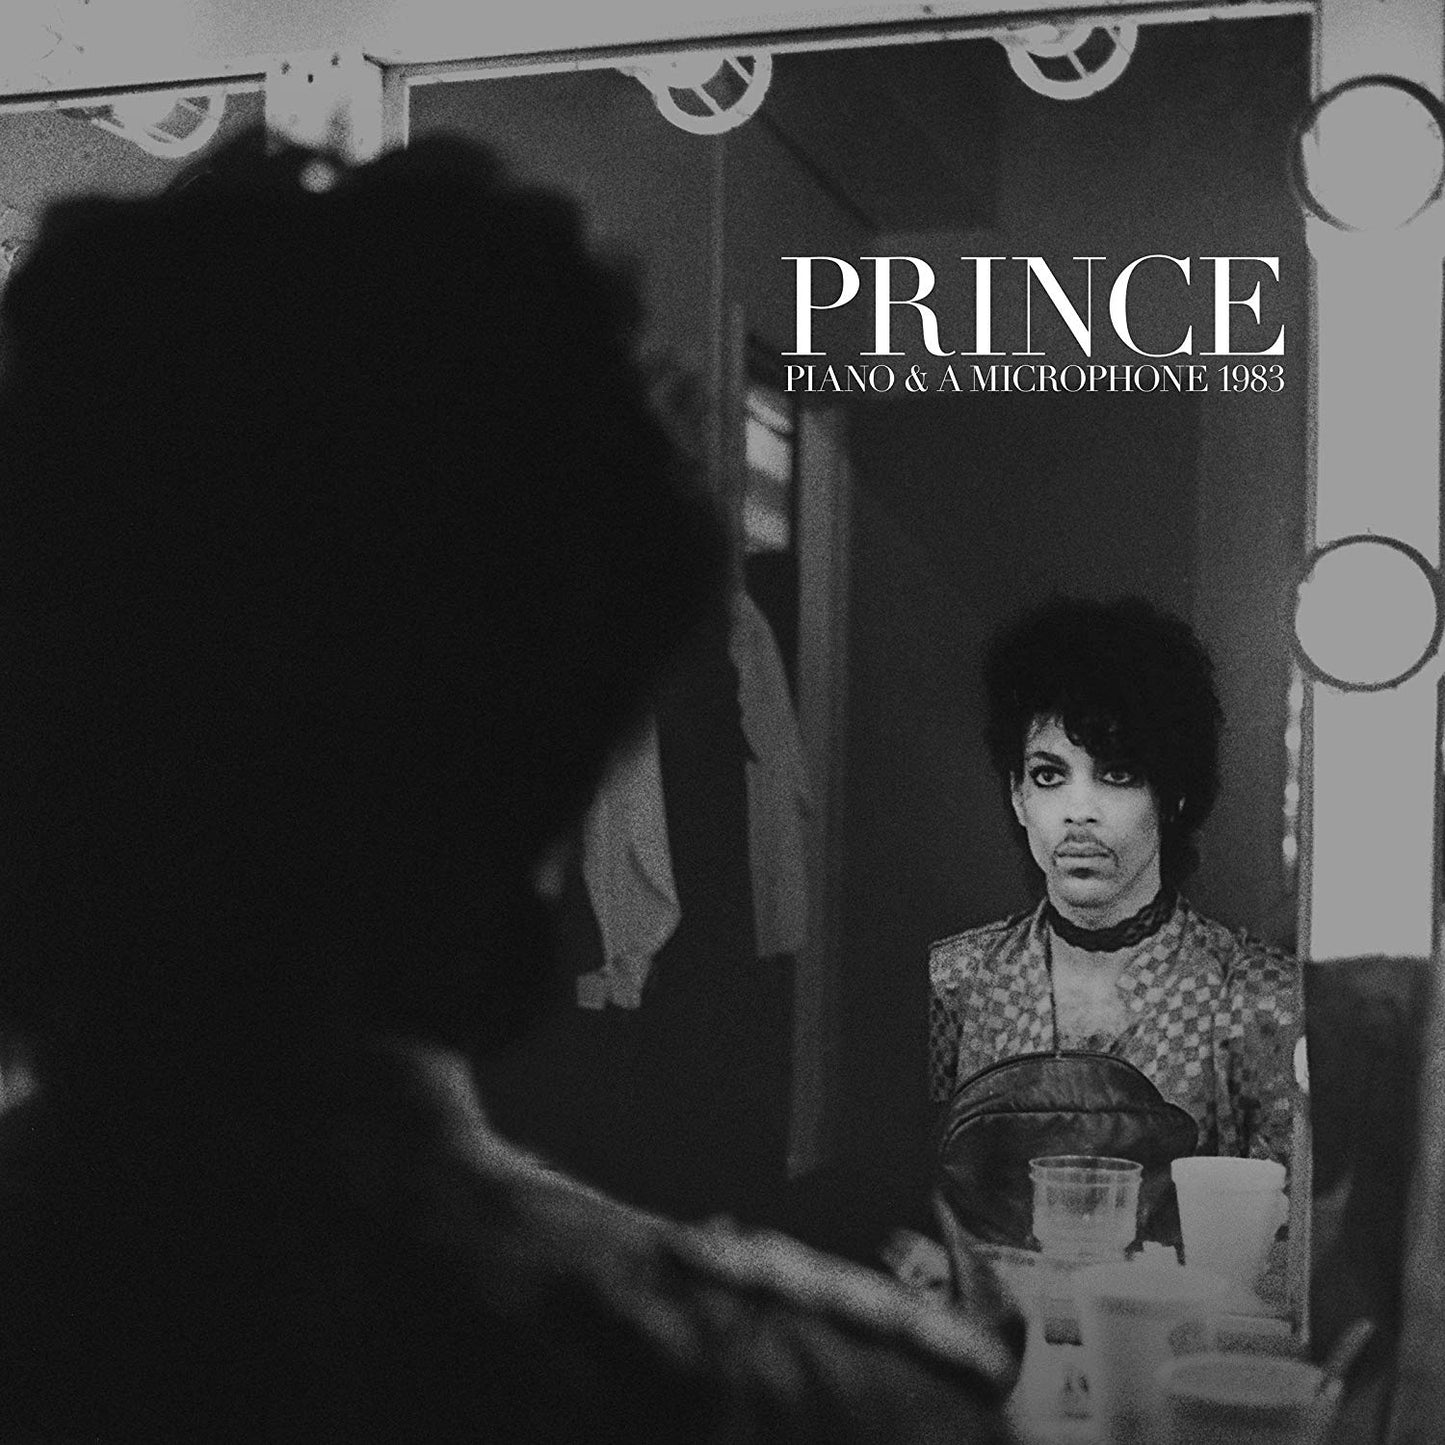 Prince - Piano & A Microphone 1983 - LP